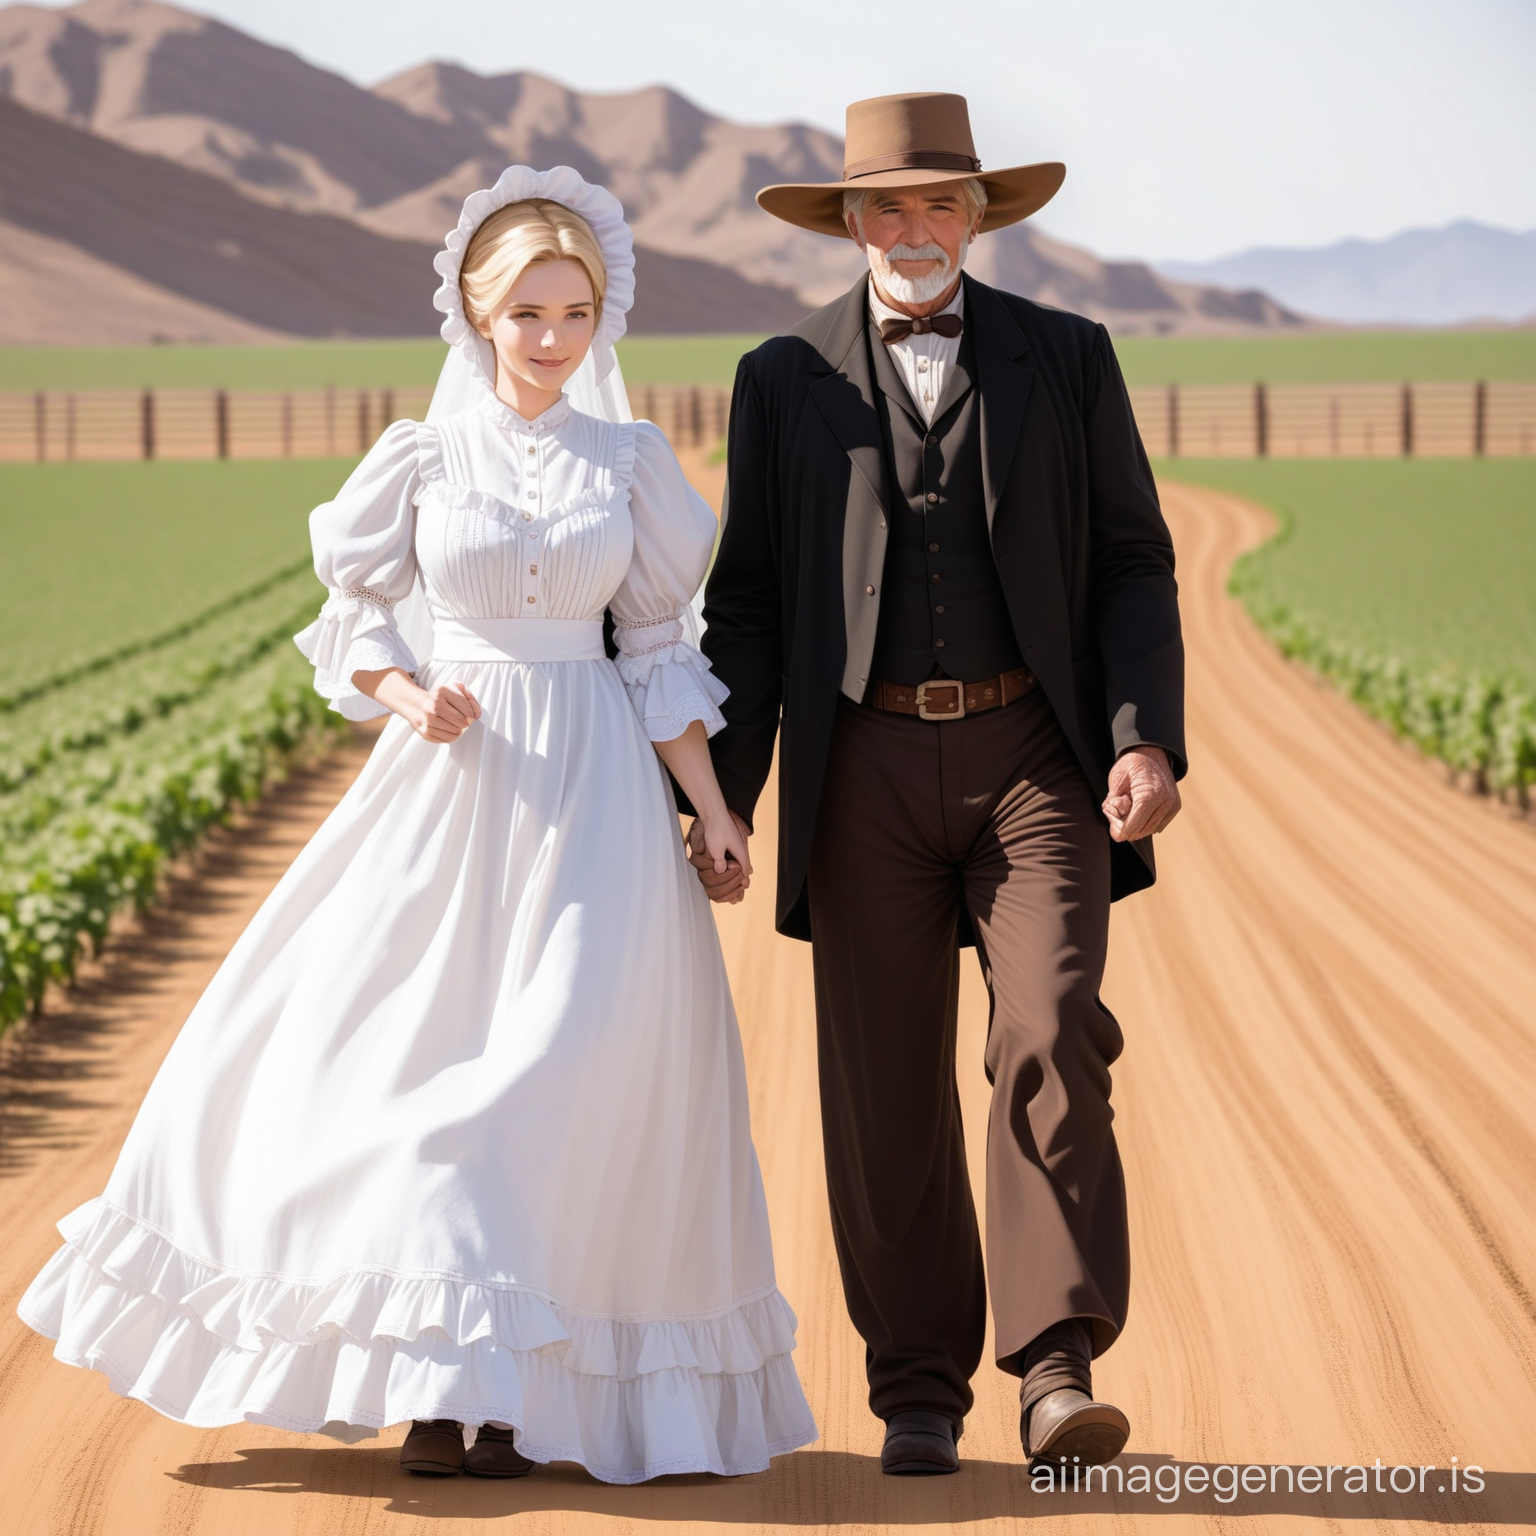 Susan Storm from the FF4 dressed as an old west farmer's wife wearing a brown floor-length loose billowing old west poofy modest dress with a long apron and a frilly bonnet hand in hand with an old farmer dressed into a black suit who seems to be her newlywed husband